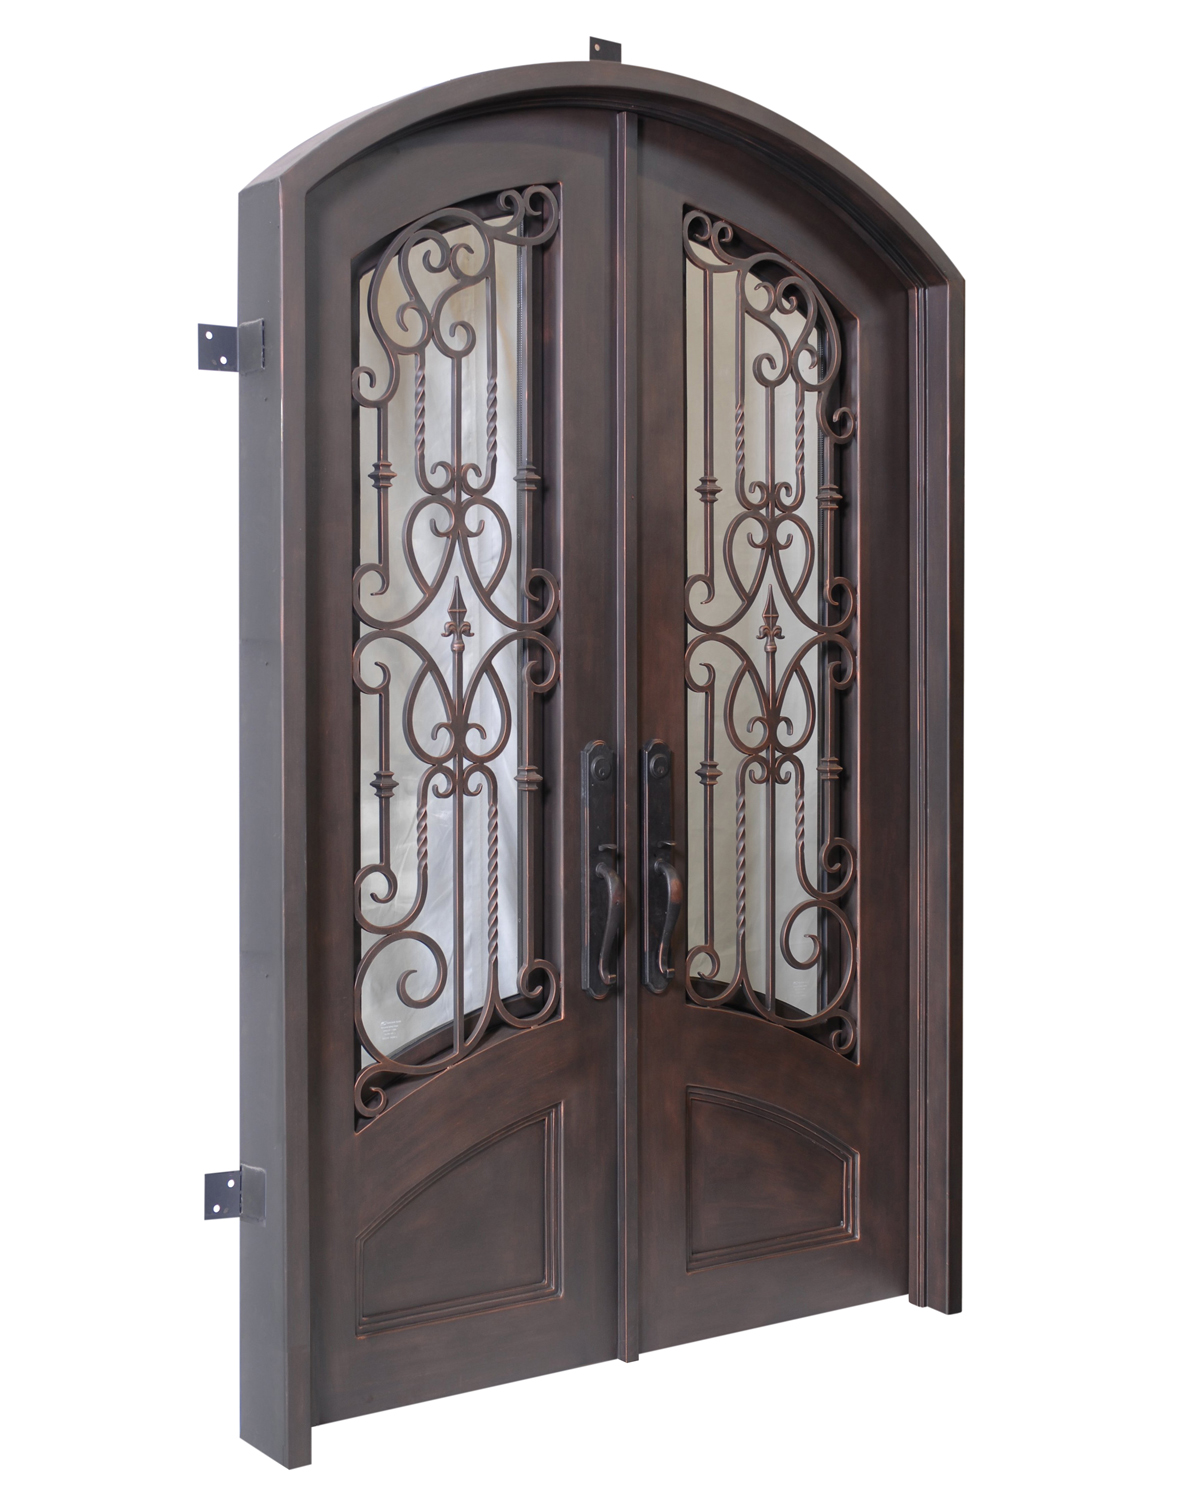 Verona hancrafted iron doors from Tasman Forge, Nelson